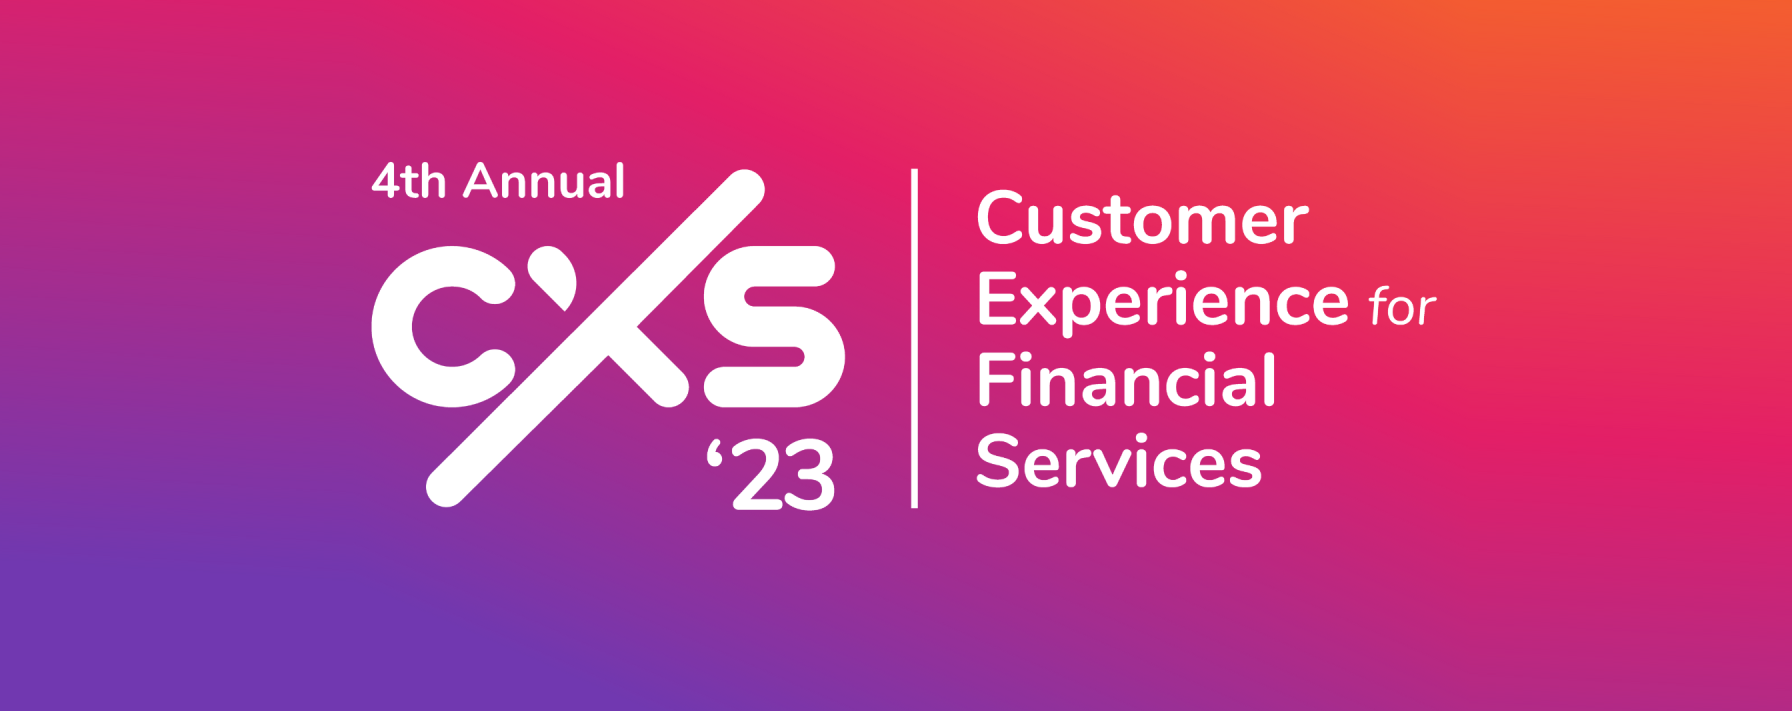 Customer Experience for Financial Services Summit